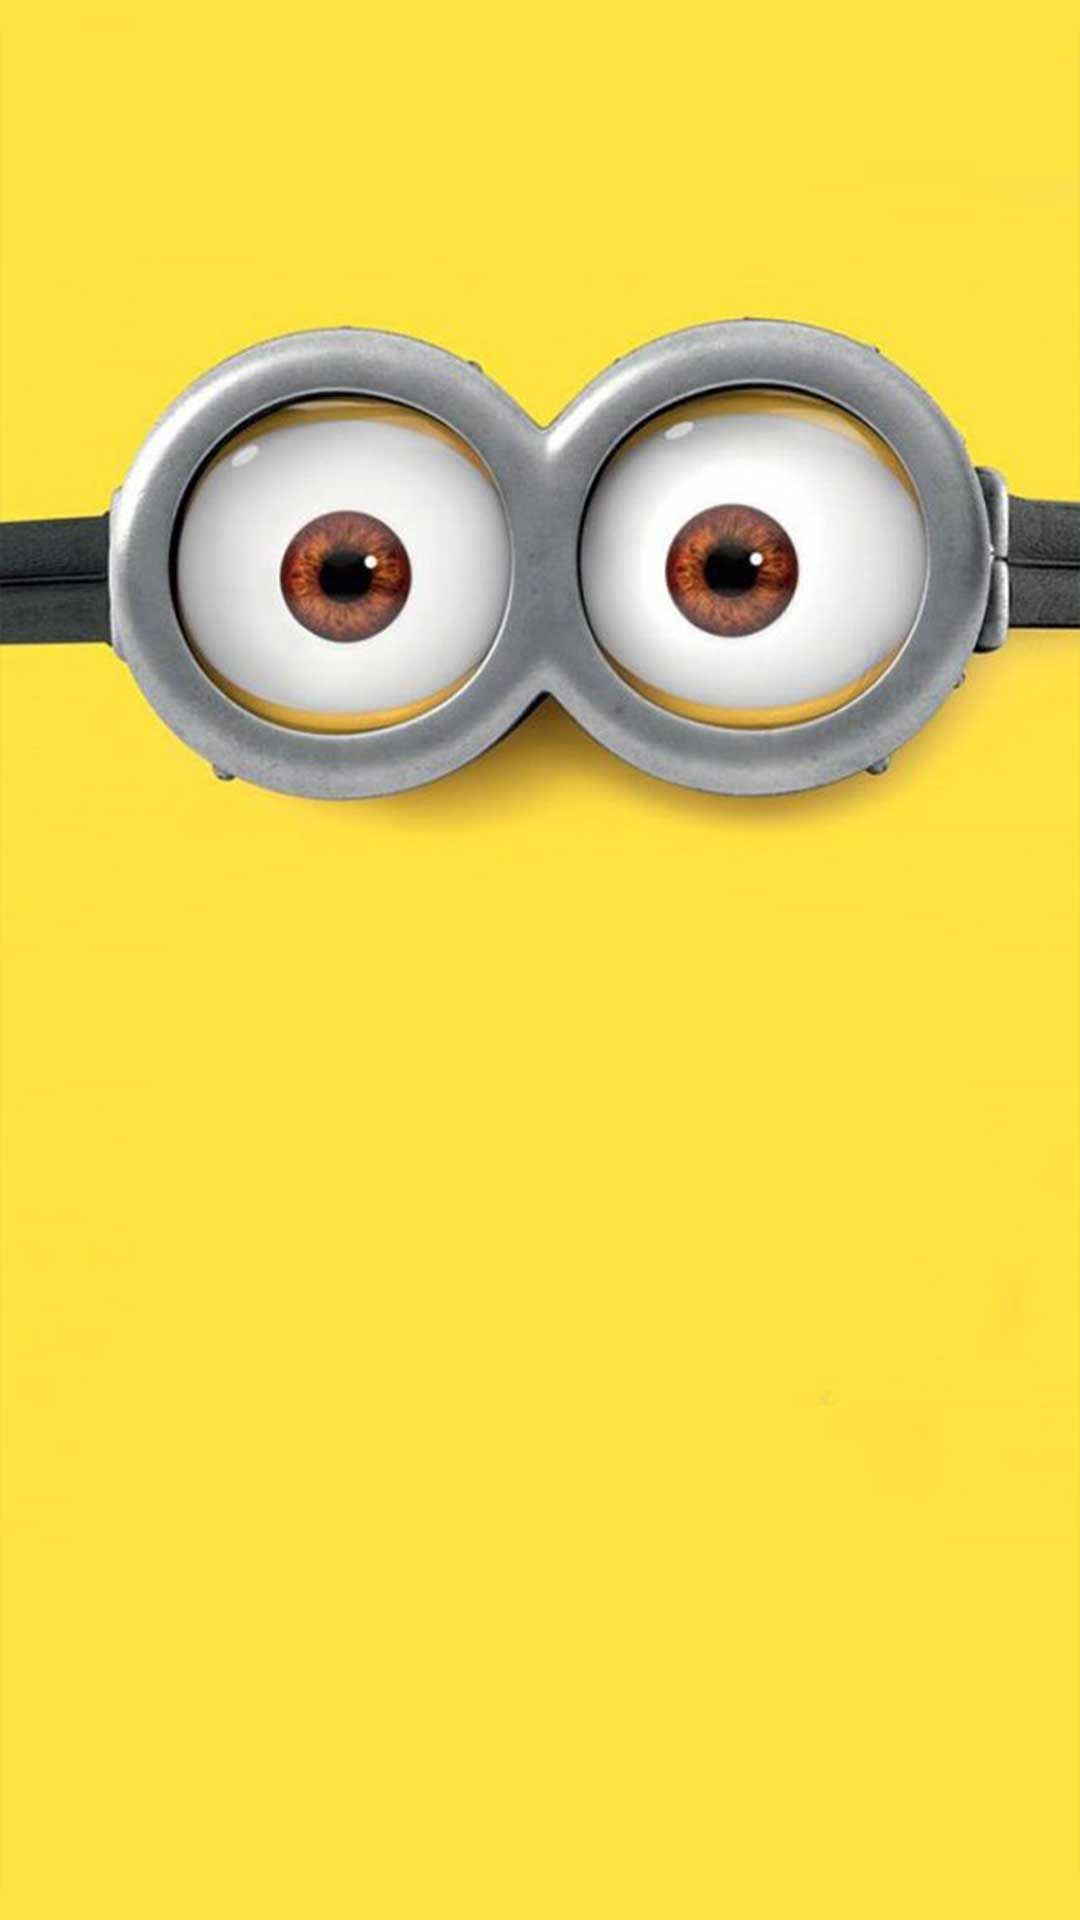 Minions Wallpaper For Iphone 6 Animated